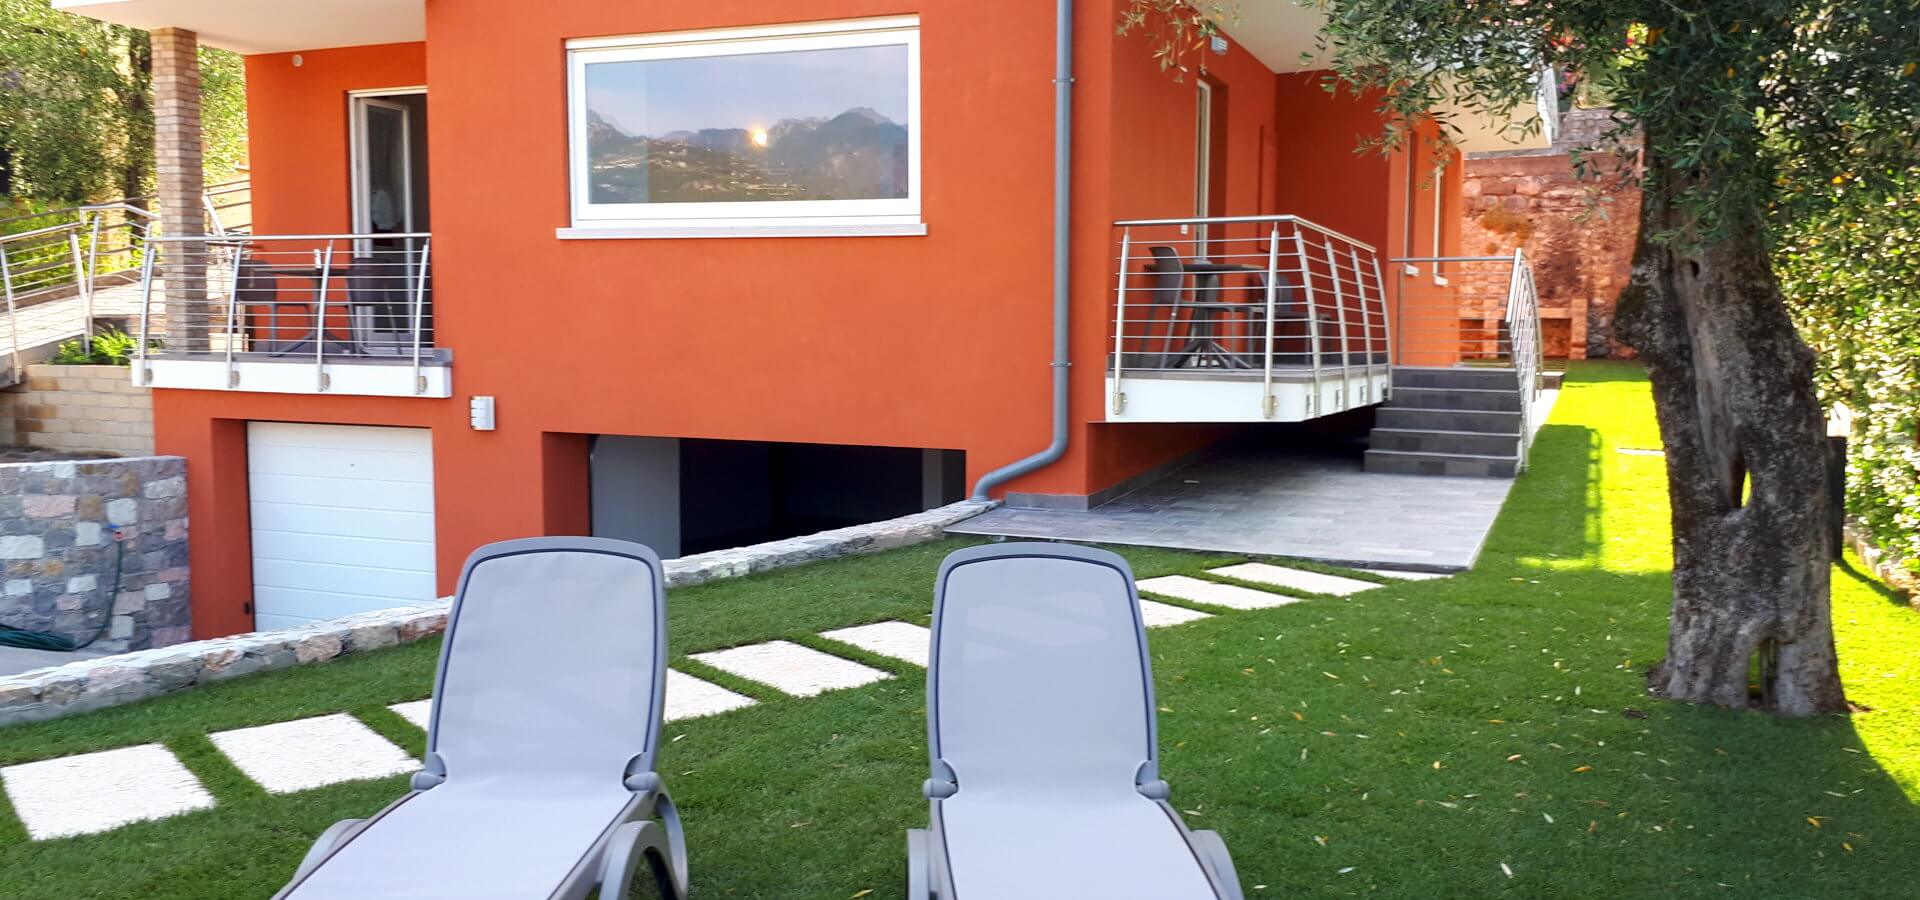 Photos of Apartments Andreis in Malcesine with balcony overlooking the lake, garden and pool